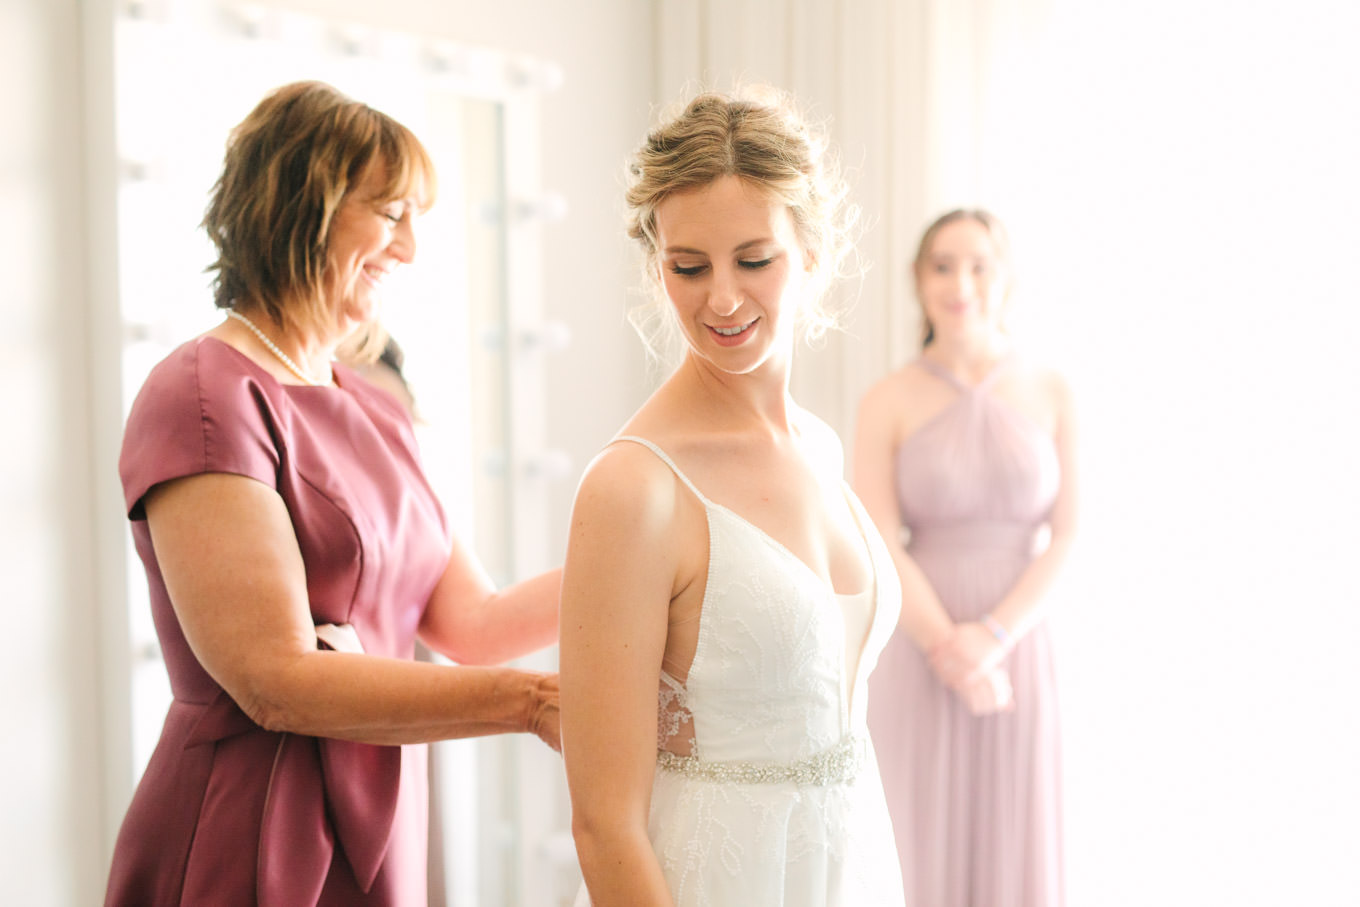 Mother of the bride helping bride get dressed | Living Desert Zoo & Gardens wedding with unique details | Elevated and colorful wedding photography for fun-loving couples in Southern California |  #PalmSprings #palmspringsphotographer #gardenwedding #palmspringswedding  Source: Mary Costa Photography | Los Angeles wedding photographer 